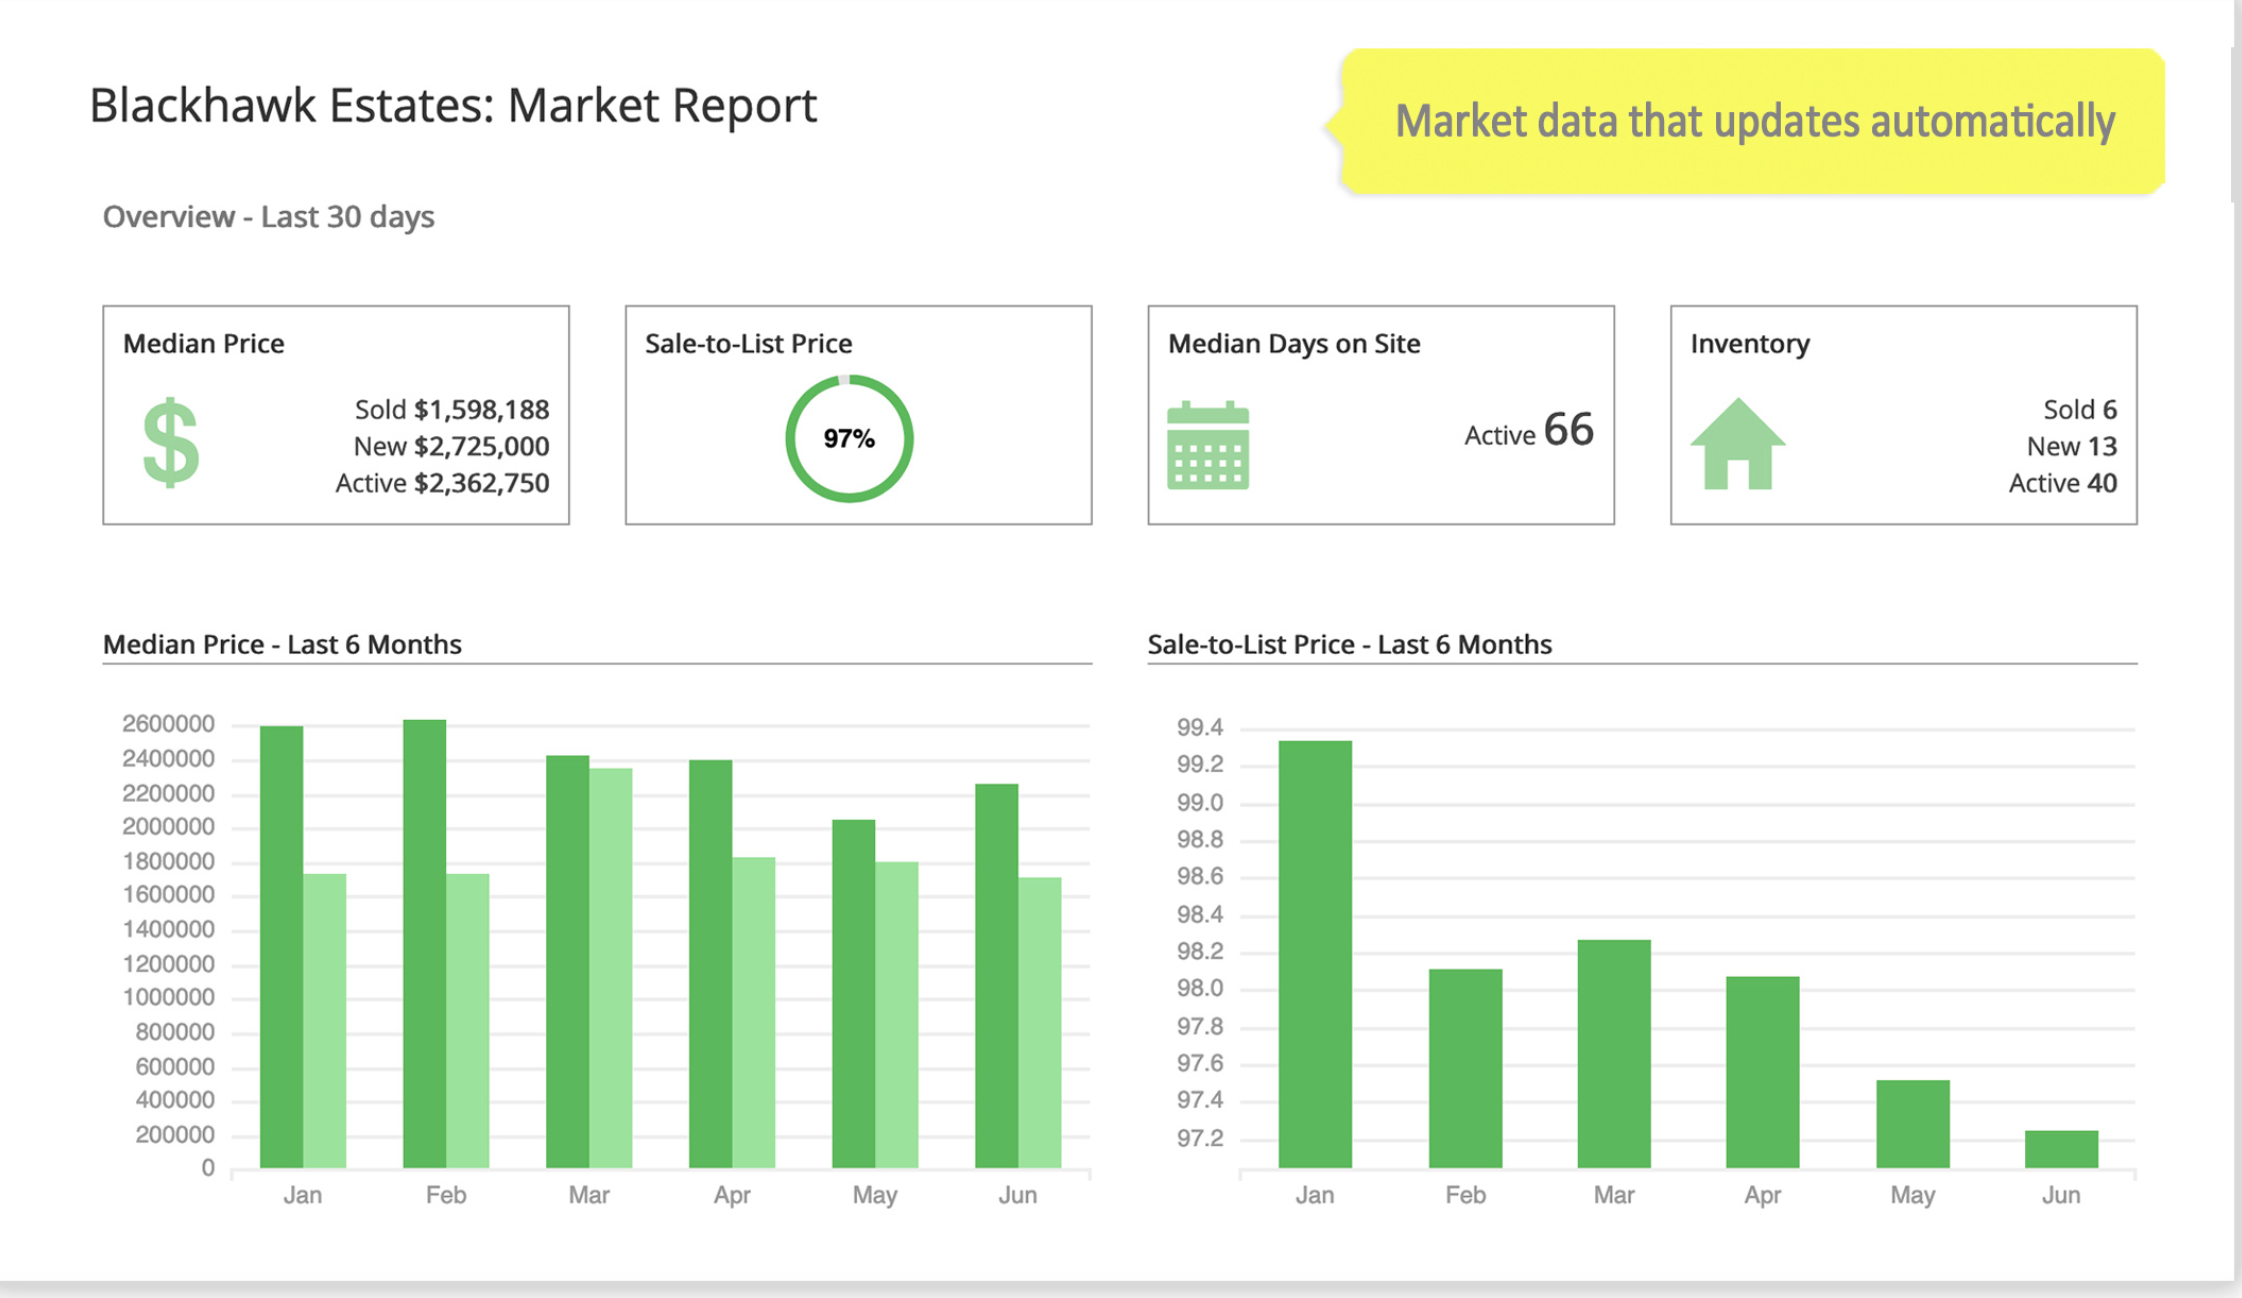 Position yourself as a local expert with local market reports for locations and listing criteria you choose. Draw on a map to create reports for locations that aren't well-defined in your MLS data.